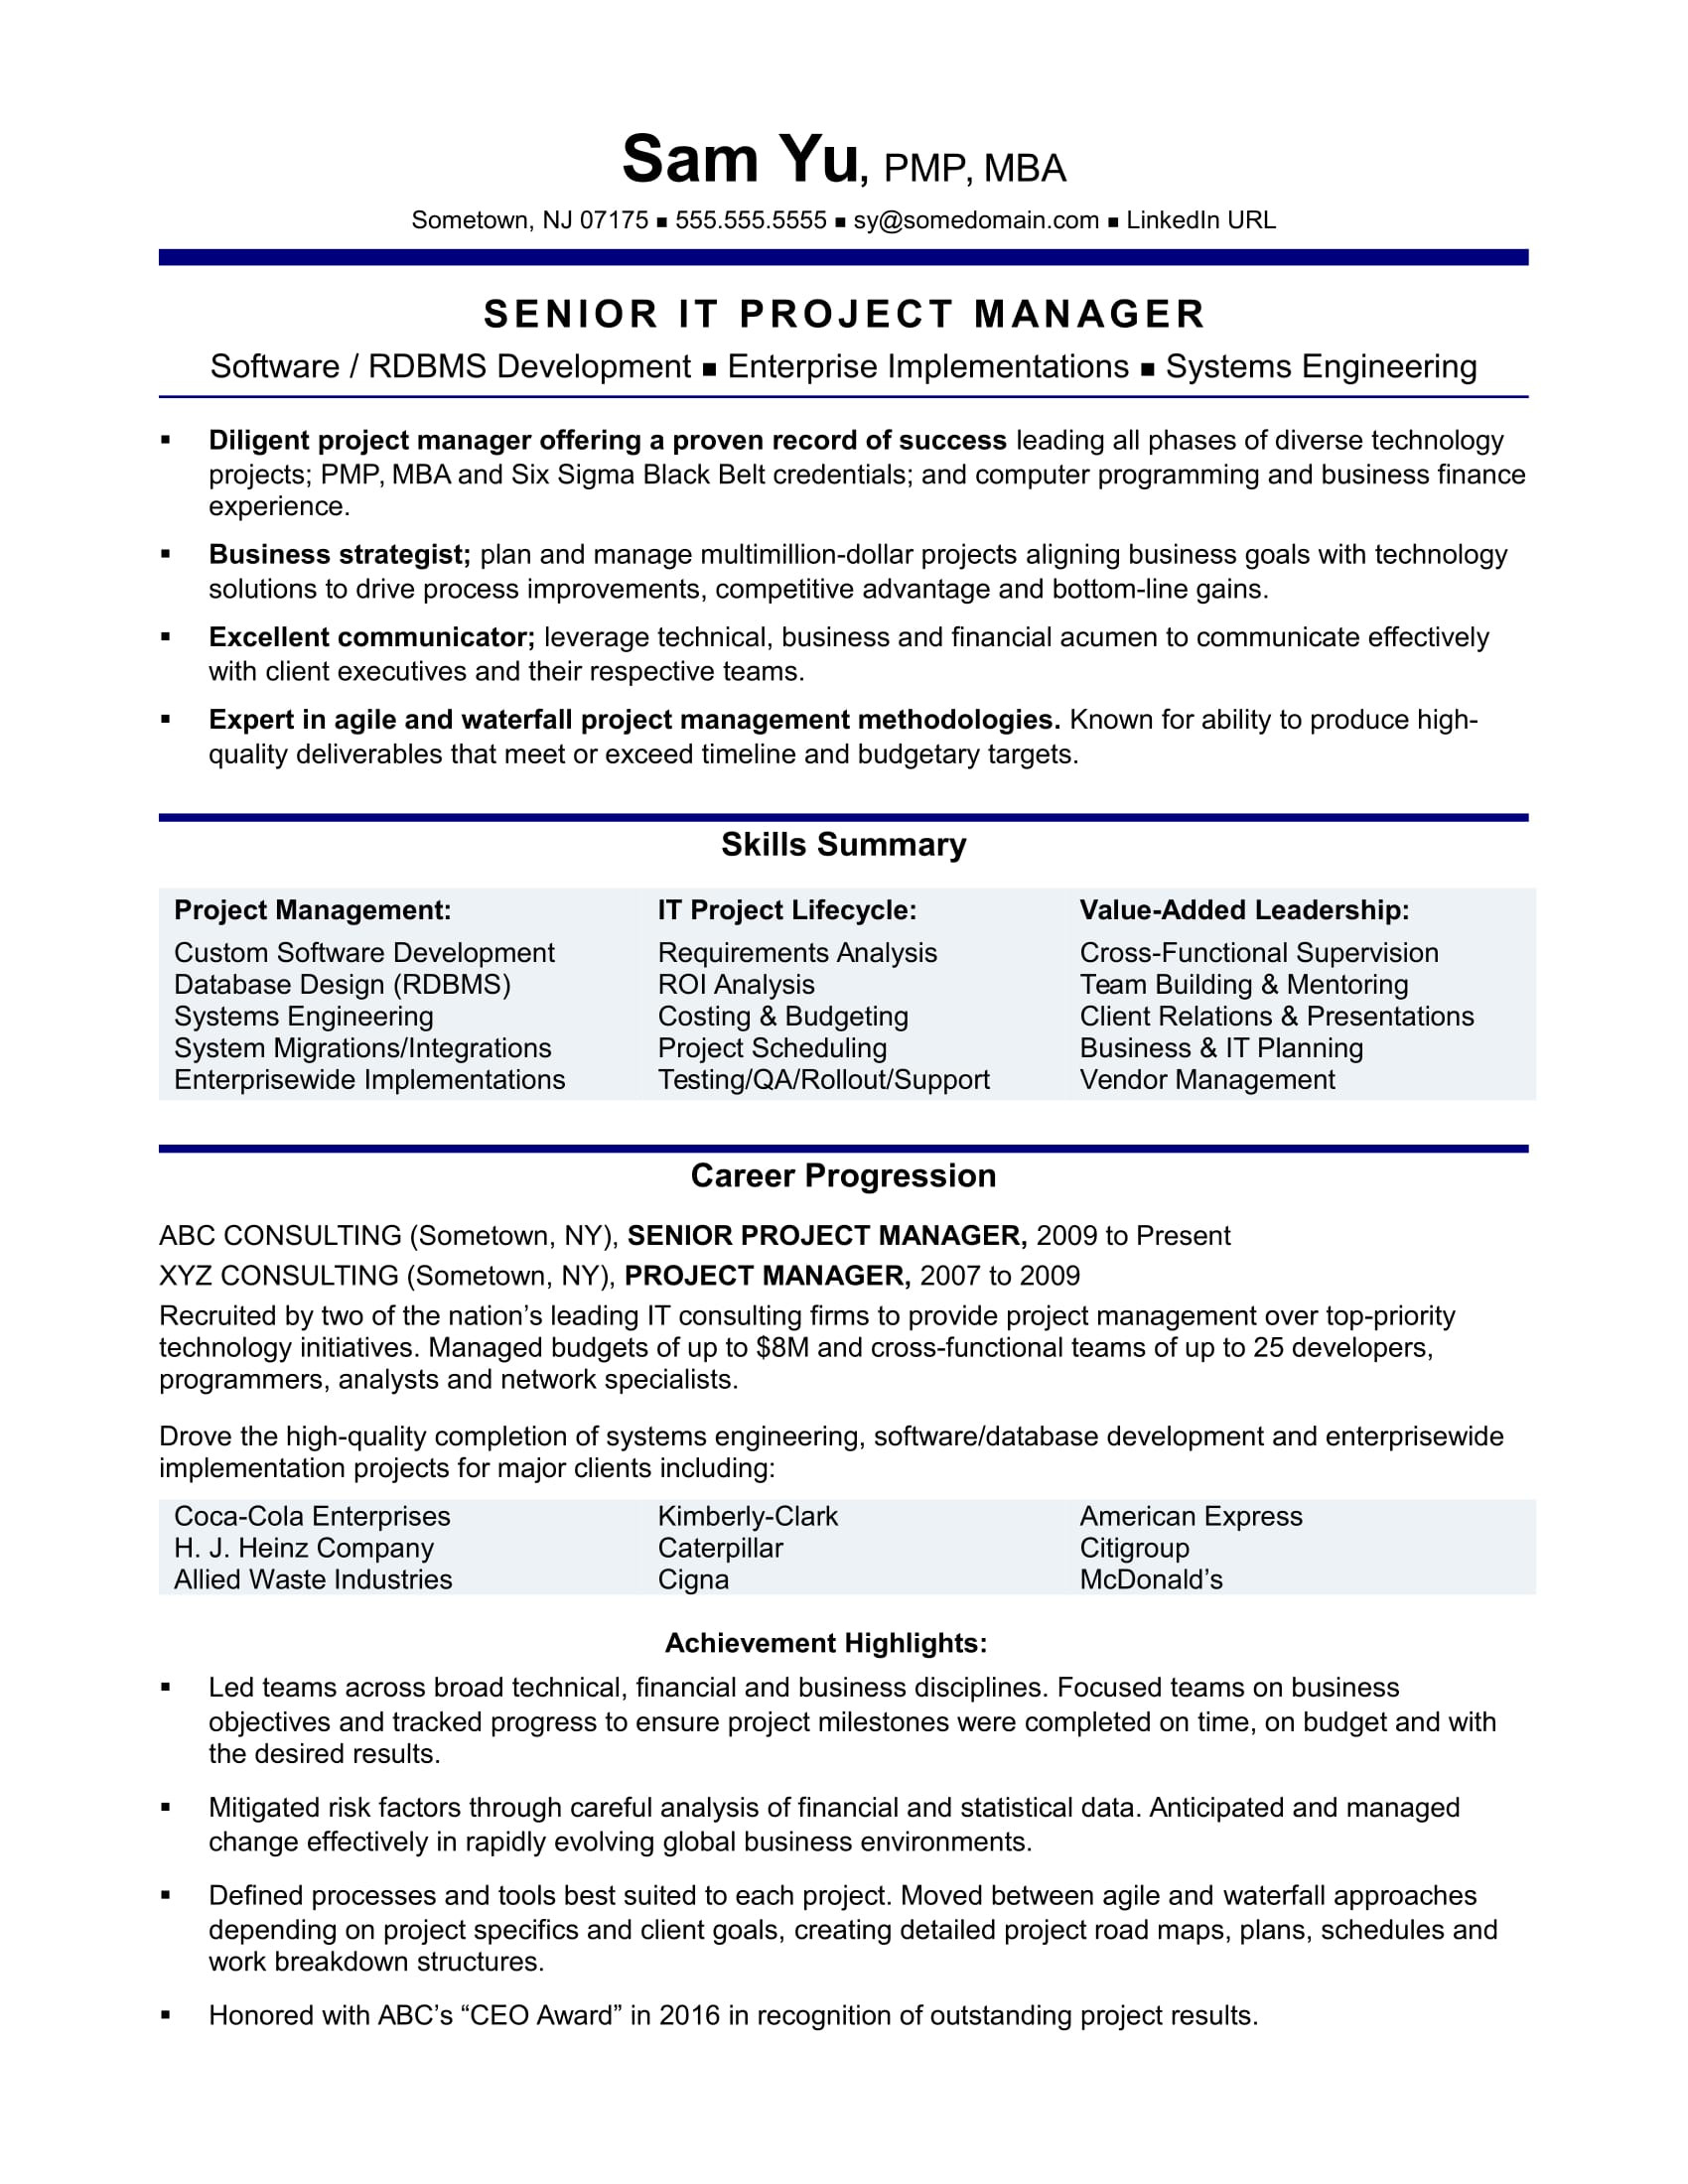 Sample Objectives for Resumes Project Management It Project Manager Resume Monster.com